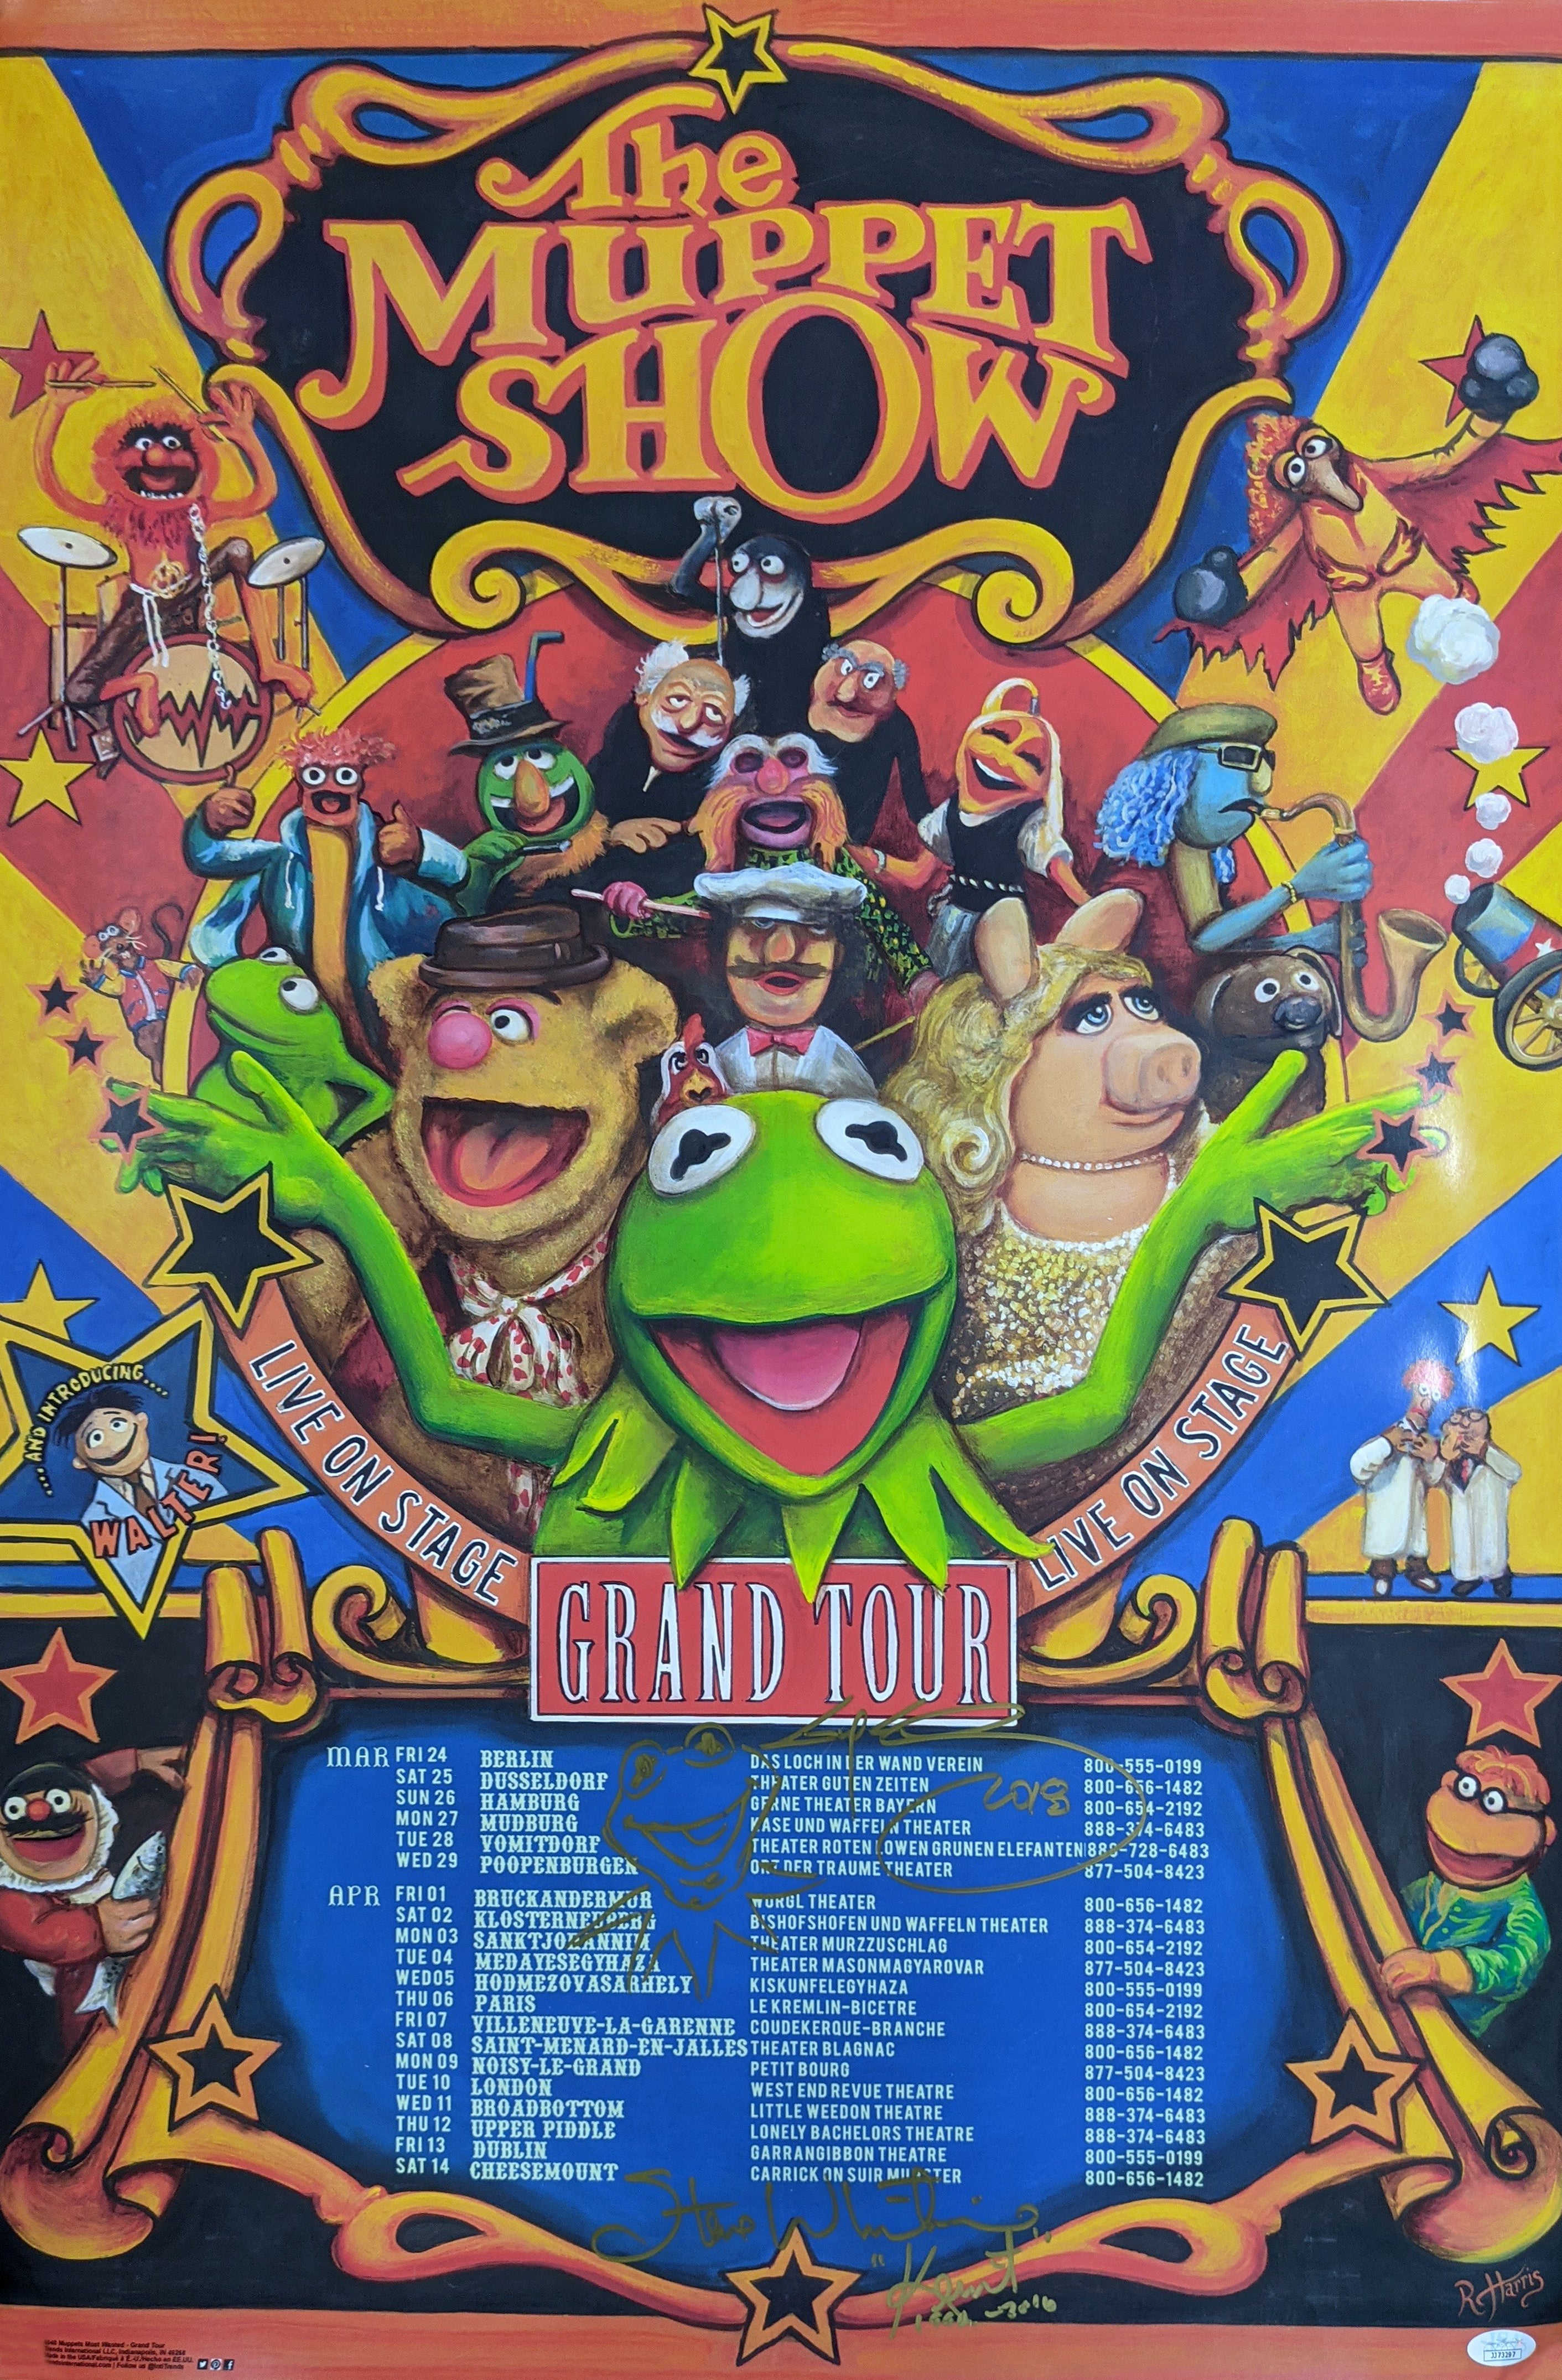 The Muppet Show 22x34 Poster Signed Autograph Whitmire Gilchrist JSA Certified COA Auto